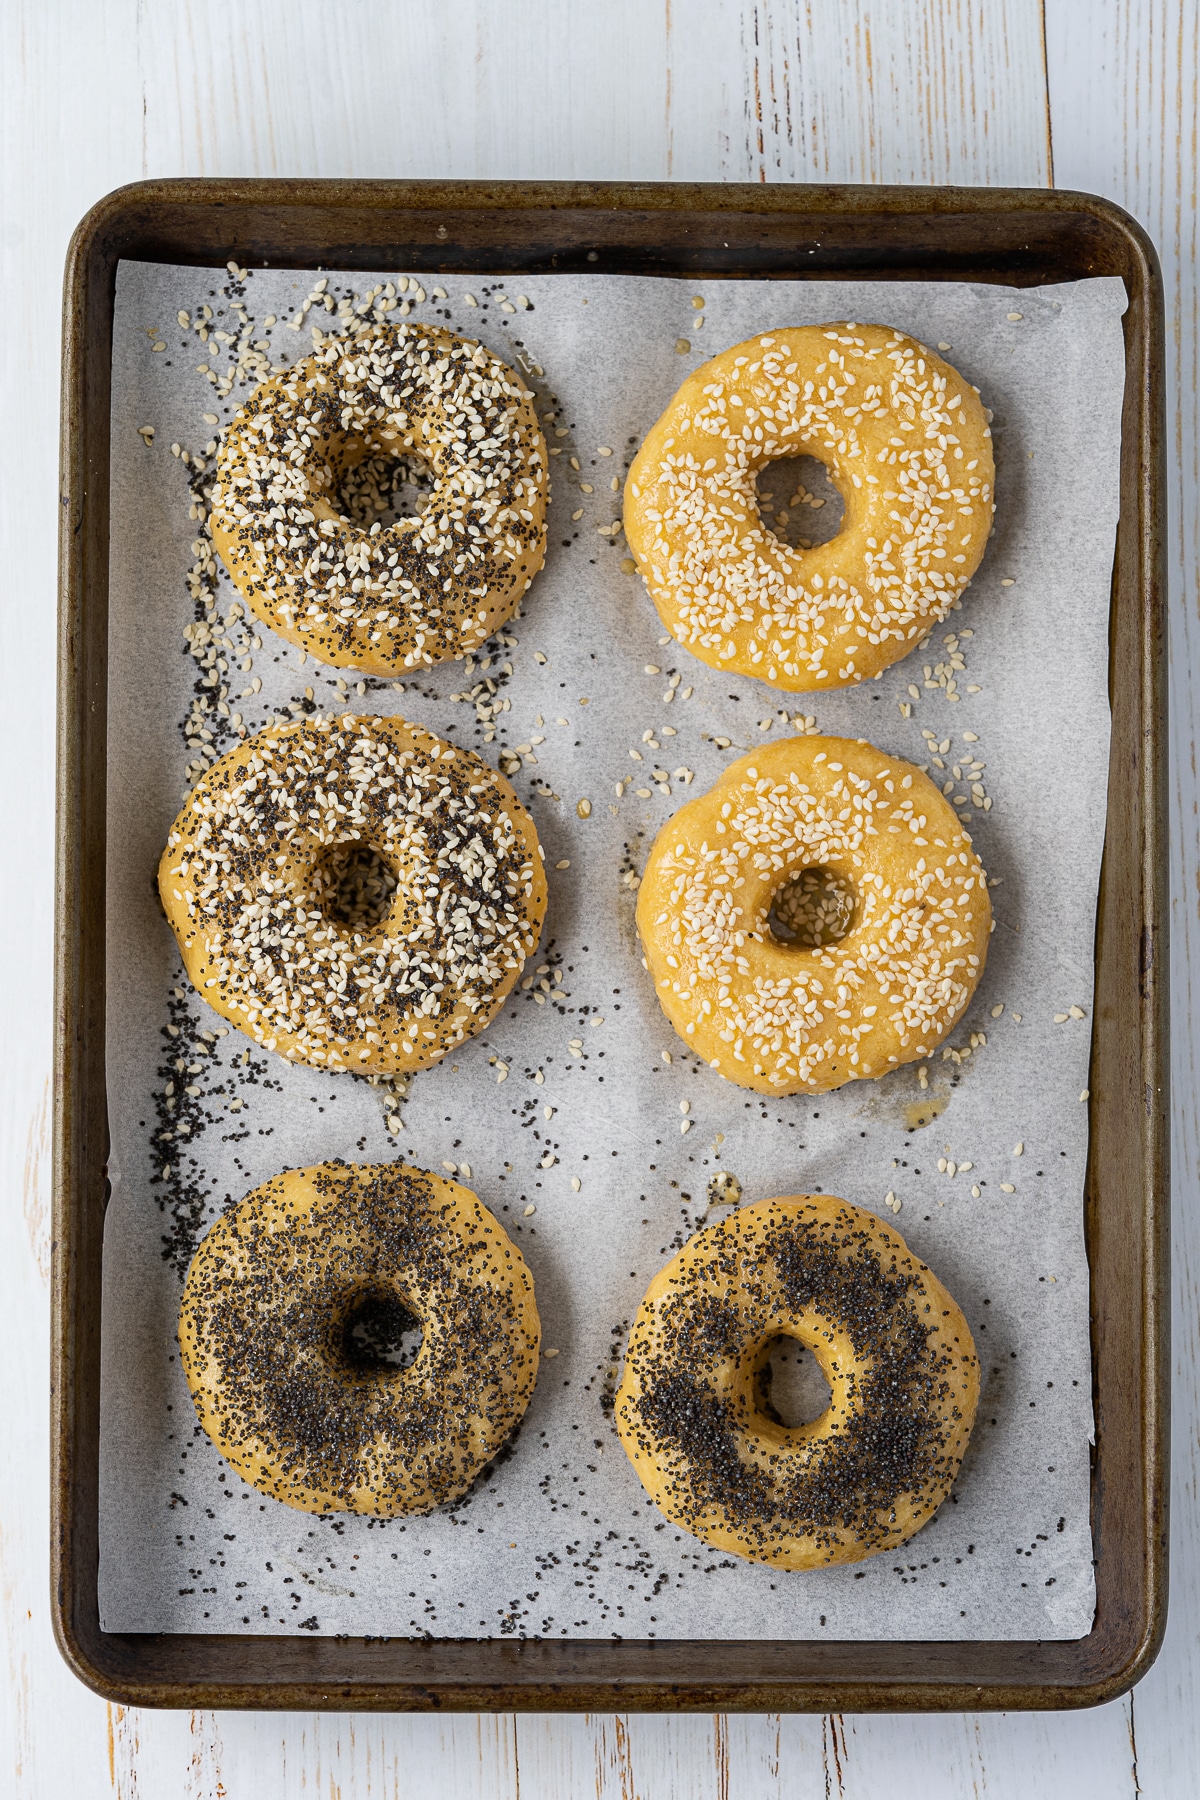 Overhead picture of 8 low carb bagels with various seeds and seasonings on them all on a baking tray lined with parchment paper.